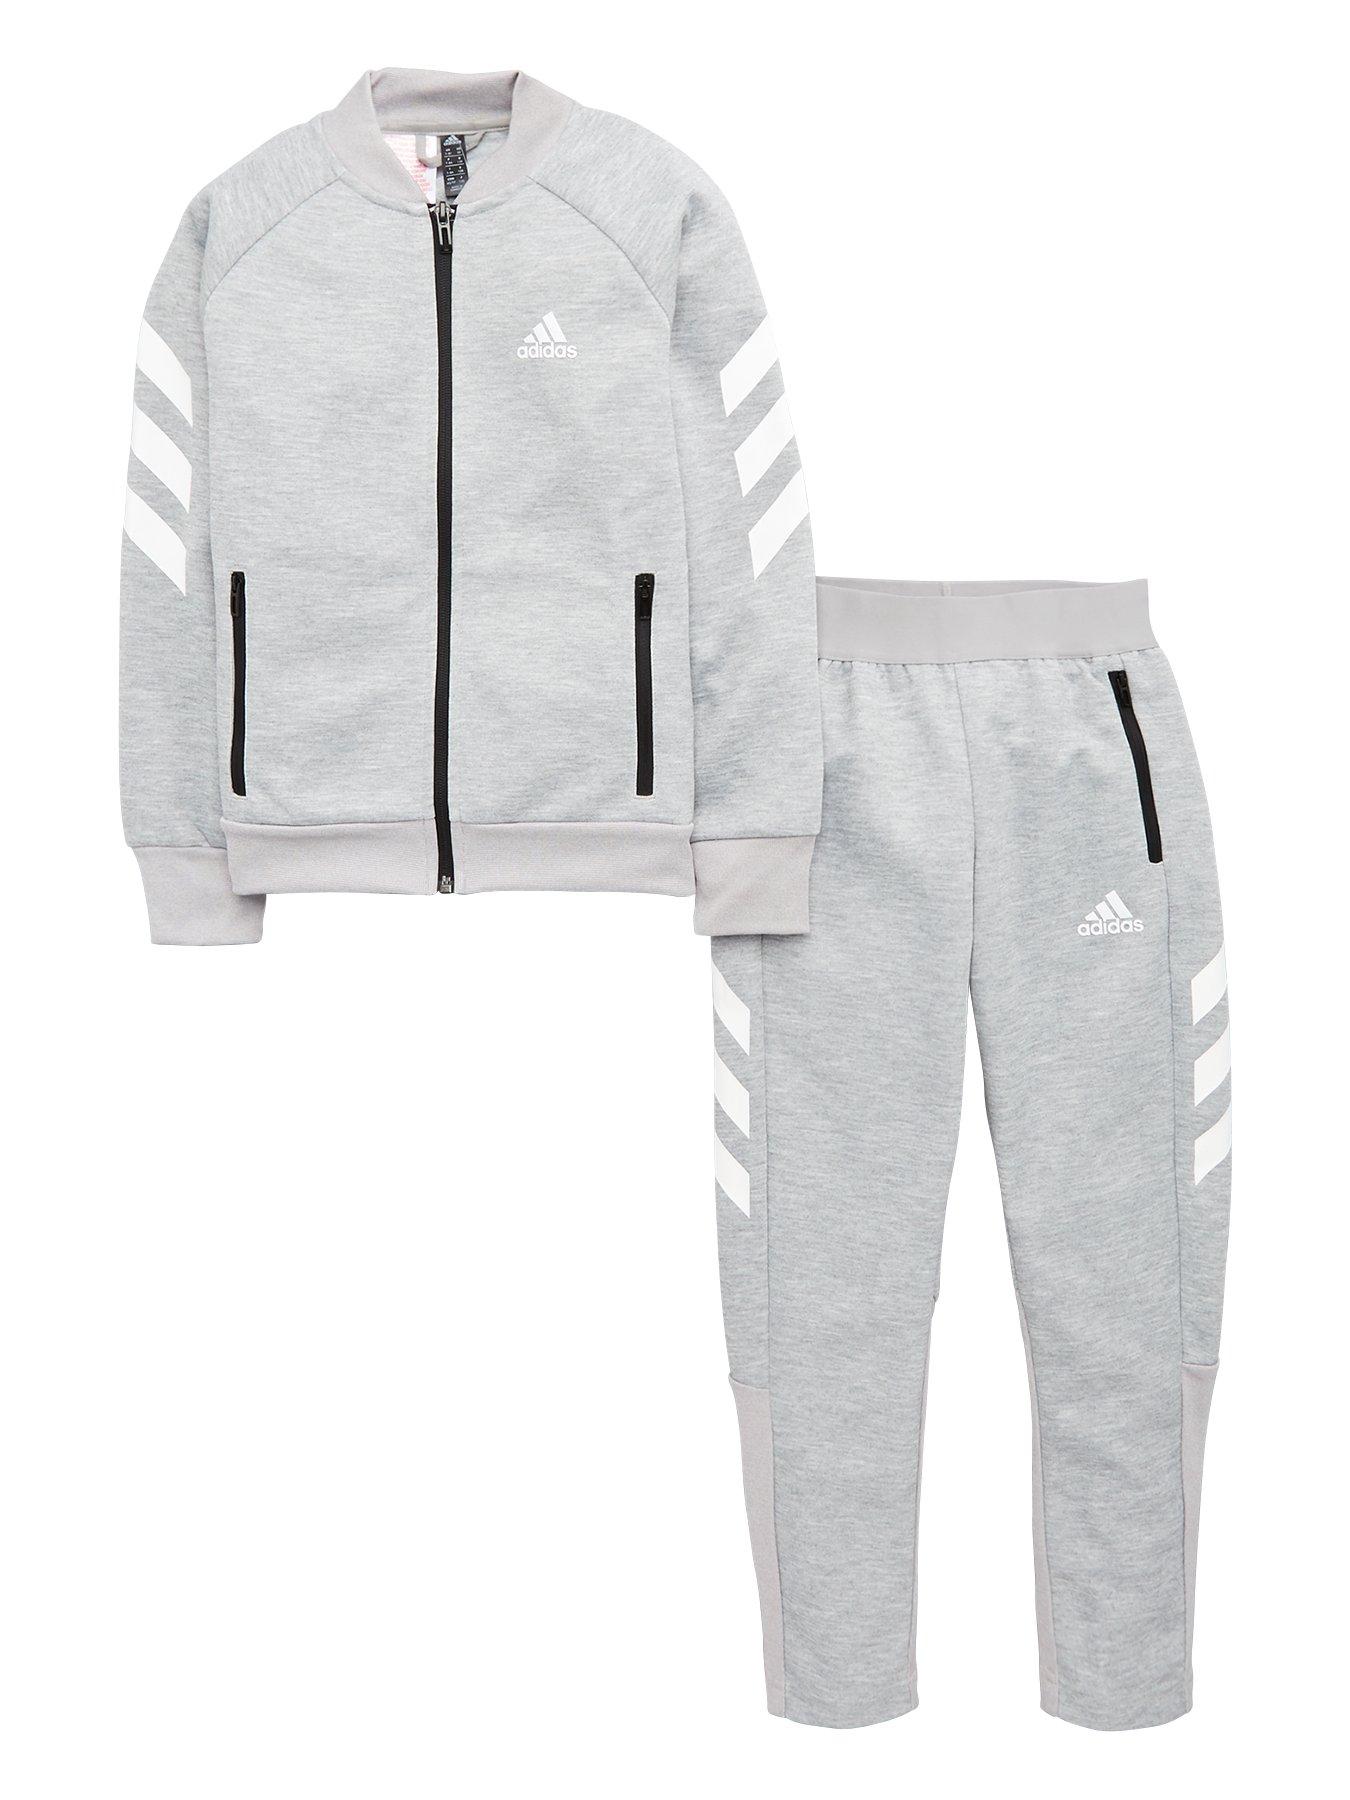 grey and white adidas tracksuit